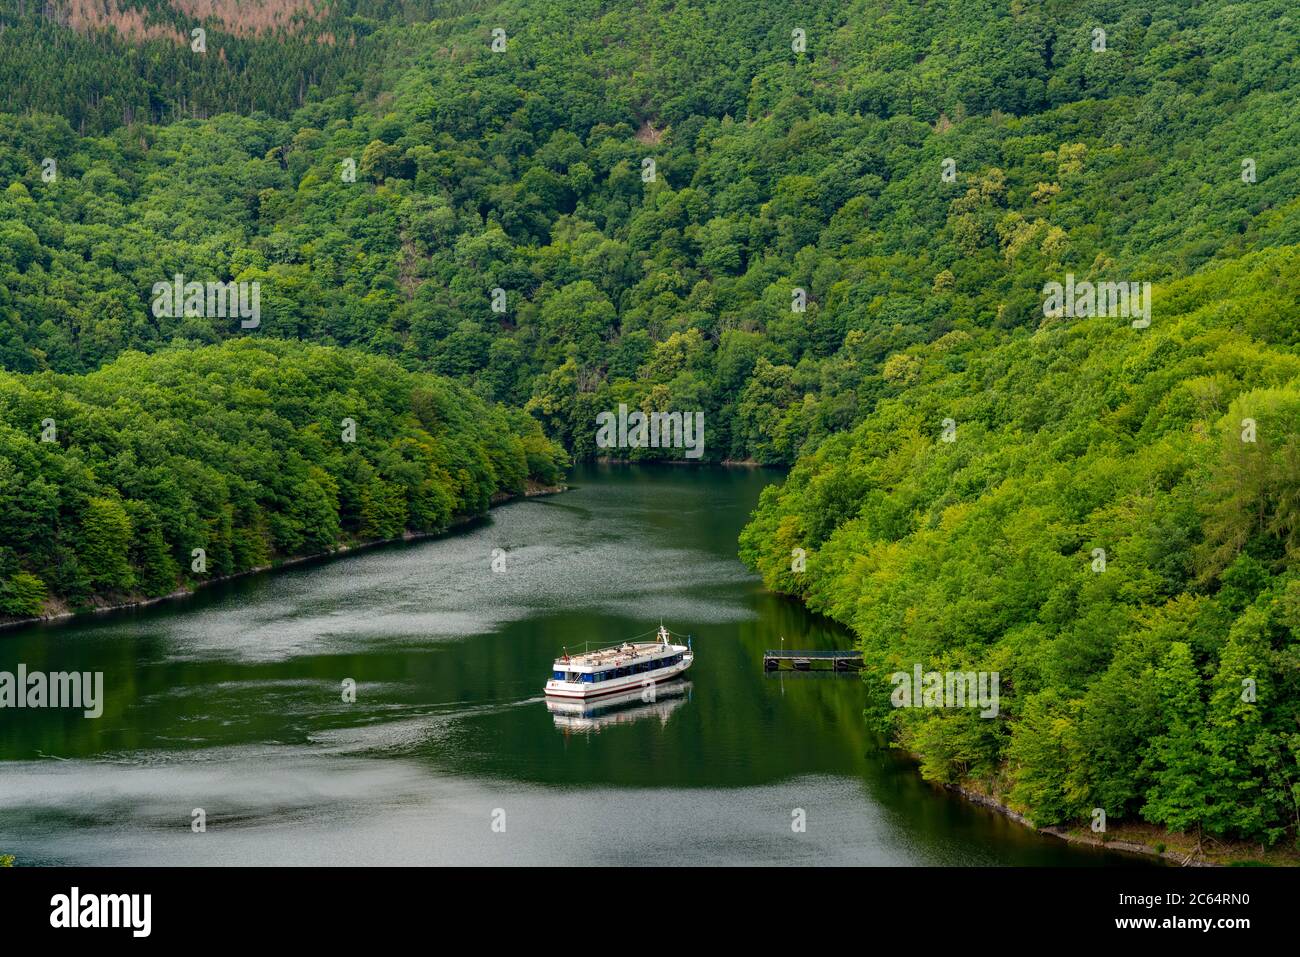 View of the Rursee, reservoir, from the Urft lake dam, Nationalpark Eifel, NRW, Germany, Stock Photo